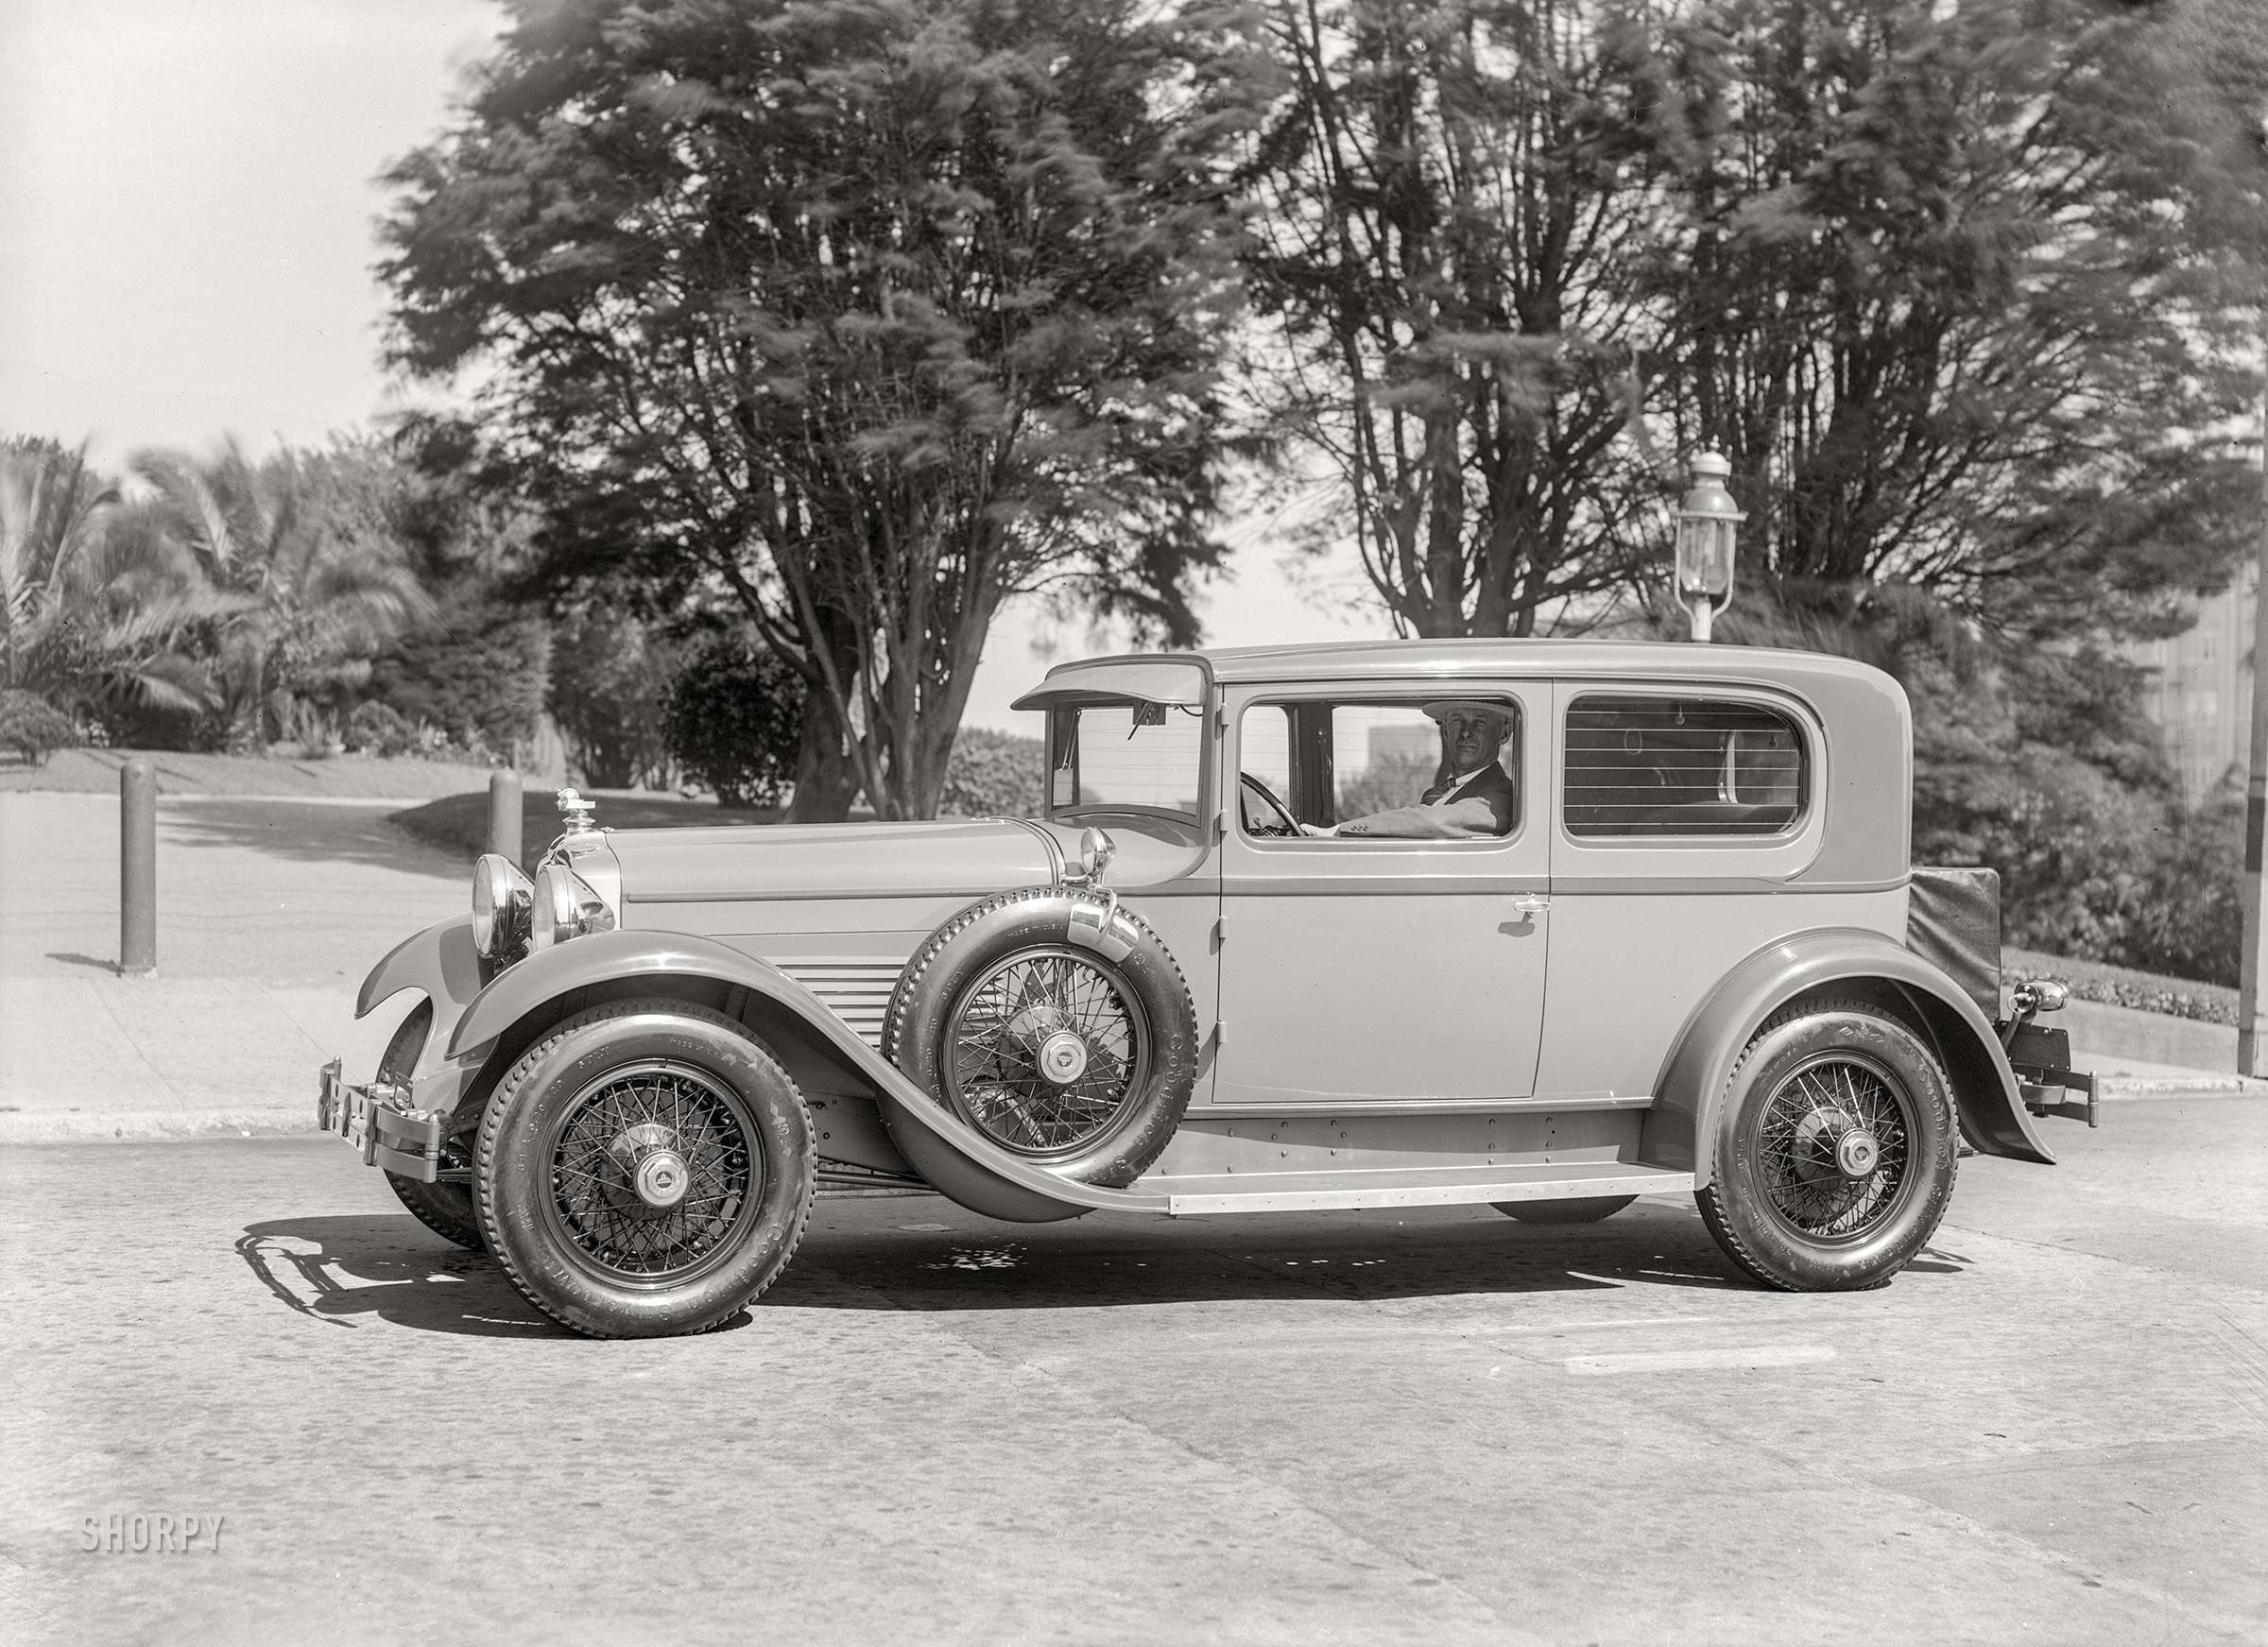 San Francisco, 1928. "Stutz two-door five-passenger sedan." The "Splendid Stutz" was also marketed as the "Safety Stutz," featuring four-wheel hydraulic brakes and wire-reinforced glass. 5x7 inch glass negative by Christopher Helin. View full size.